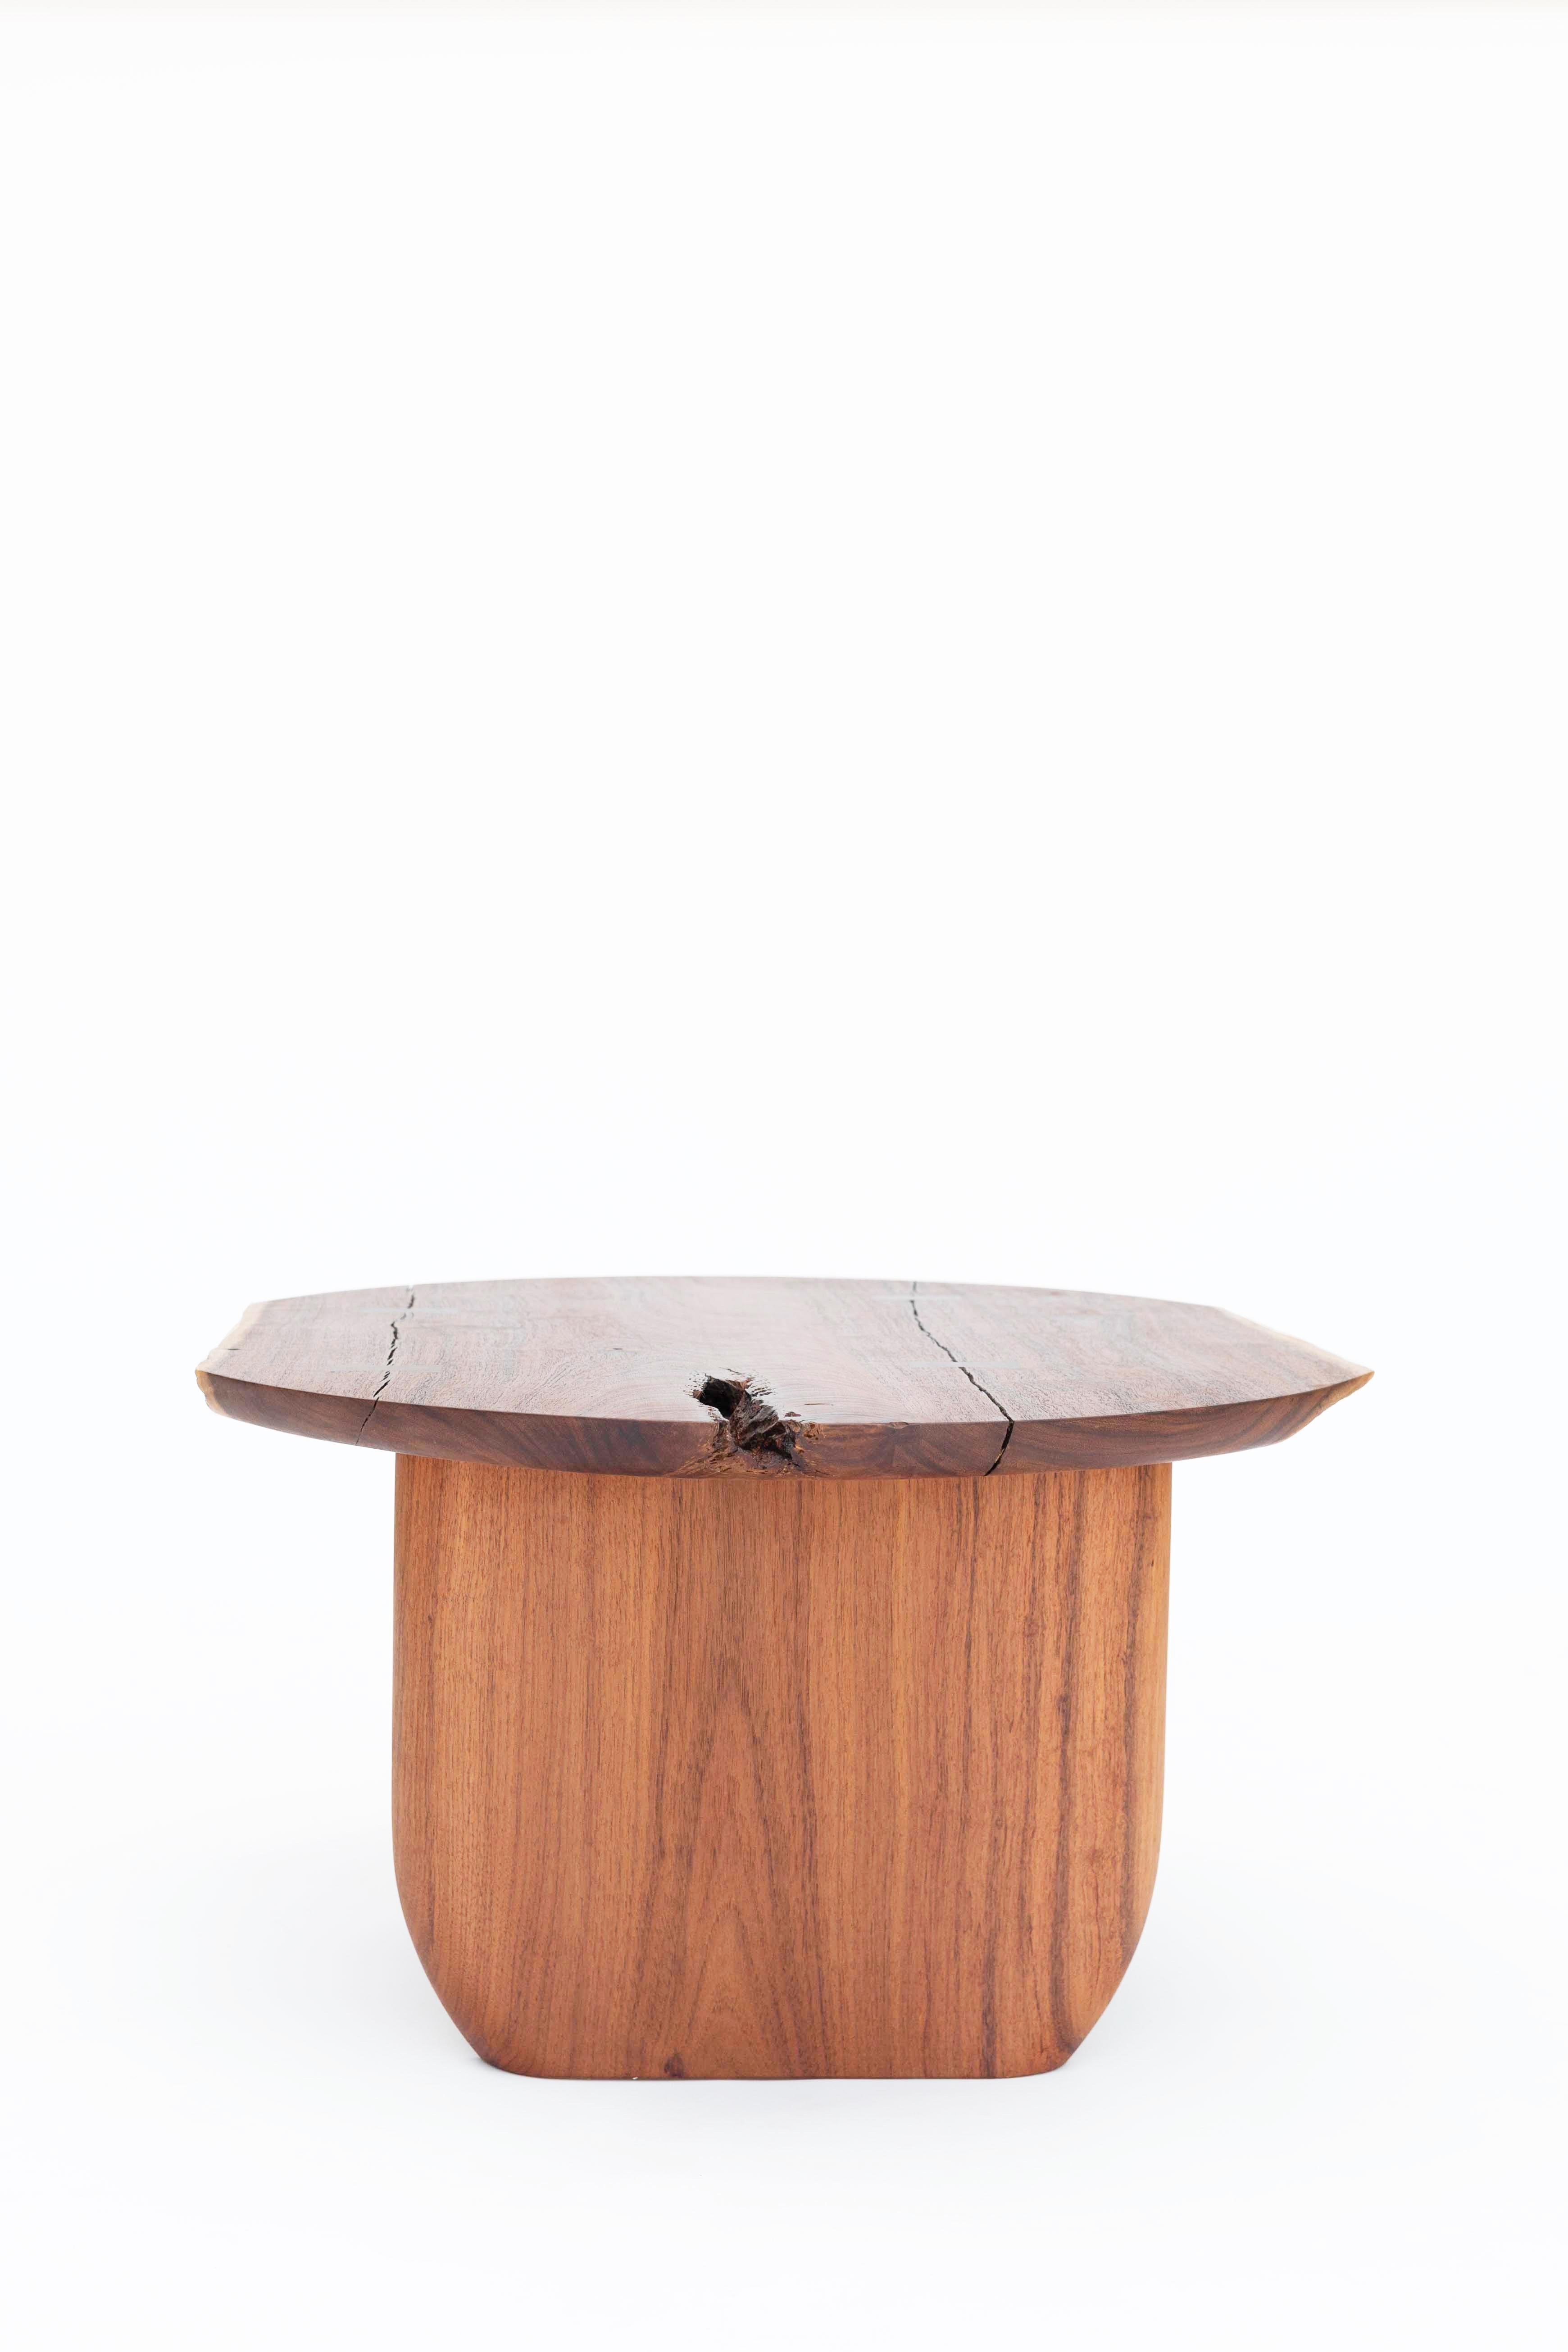 This coffee table is elaborated by using remarkable wood planks from the Tzalam - Caribbean Walnut tree, one of South Mexico’s hardwoods. It is characterized by its beautiful natural drawings with color tones ranging from brown, gold to yellow.
The